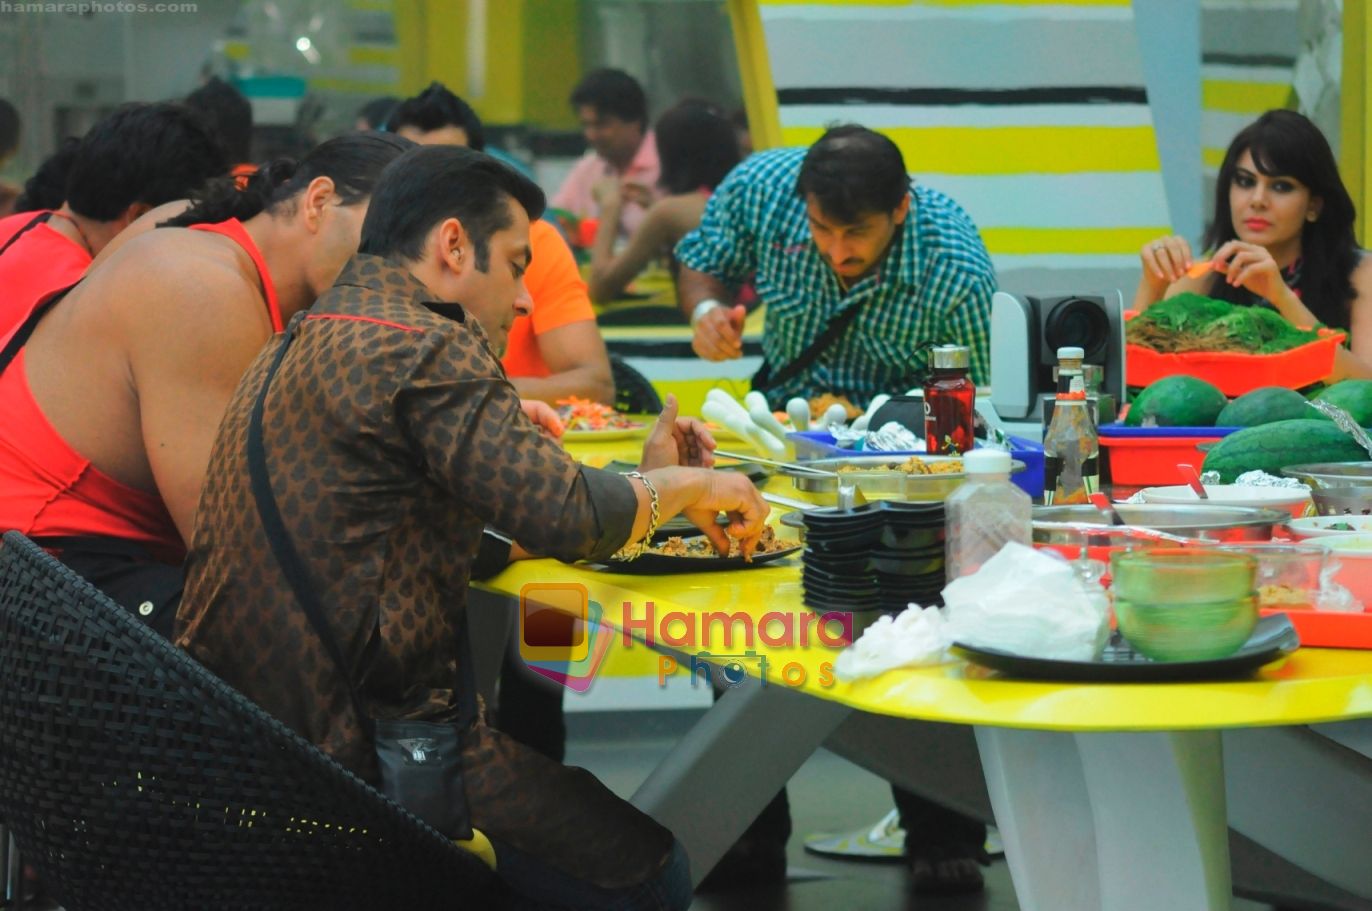 Salman has dinner with housemates at the Bigg Boss House on 29th Oct 2010 